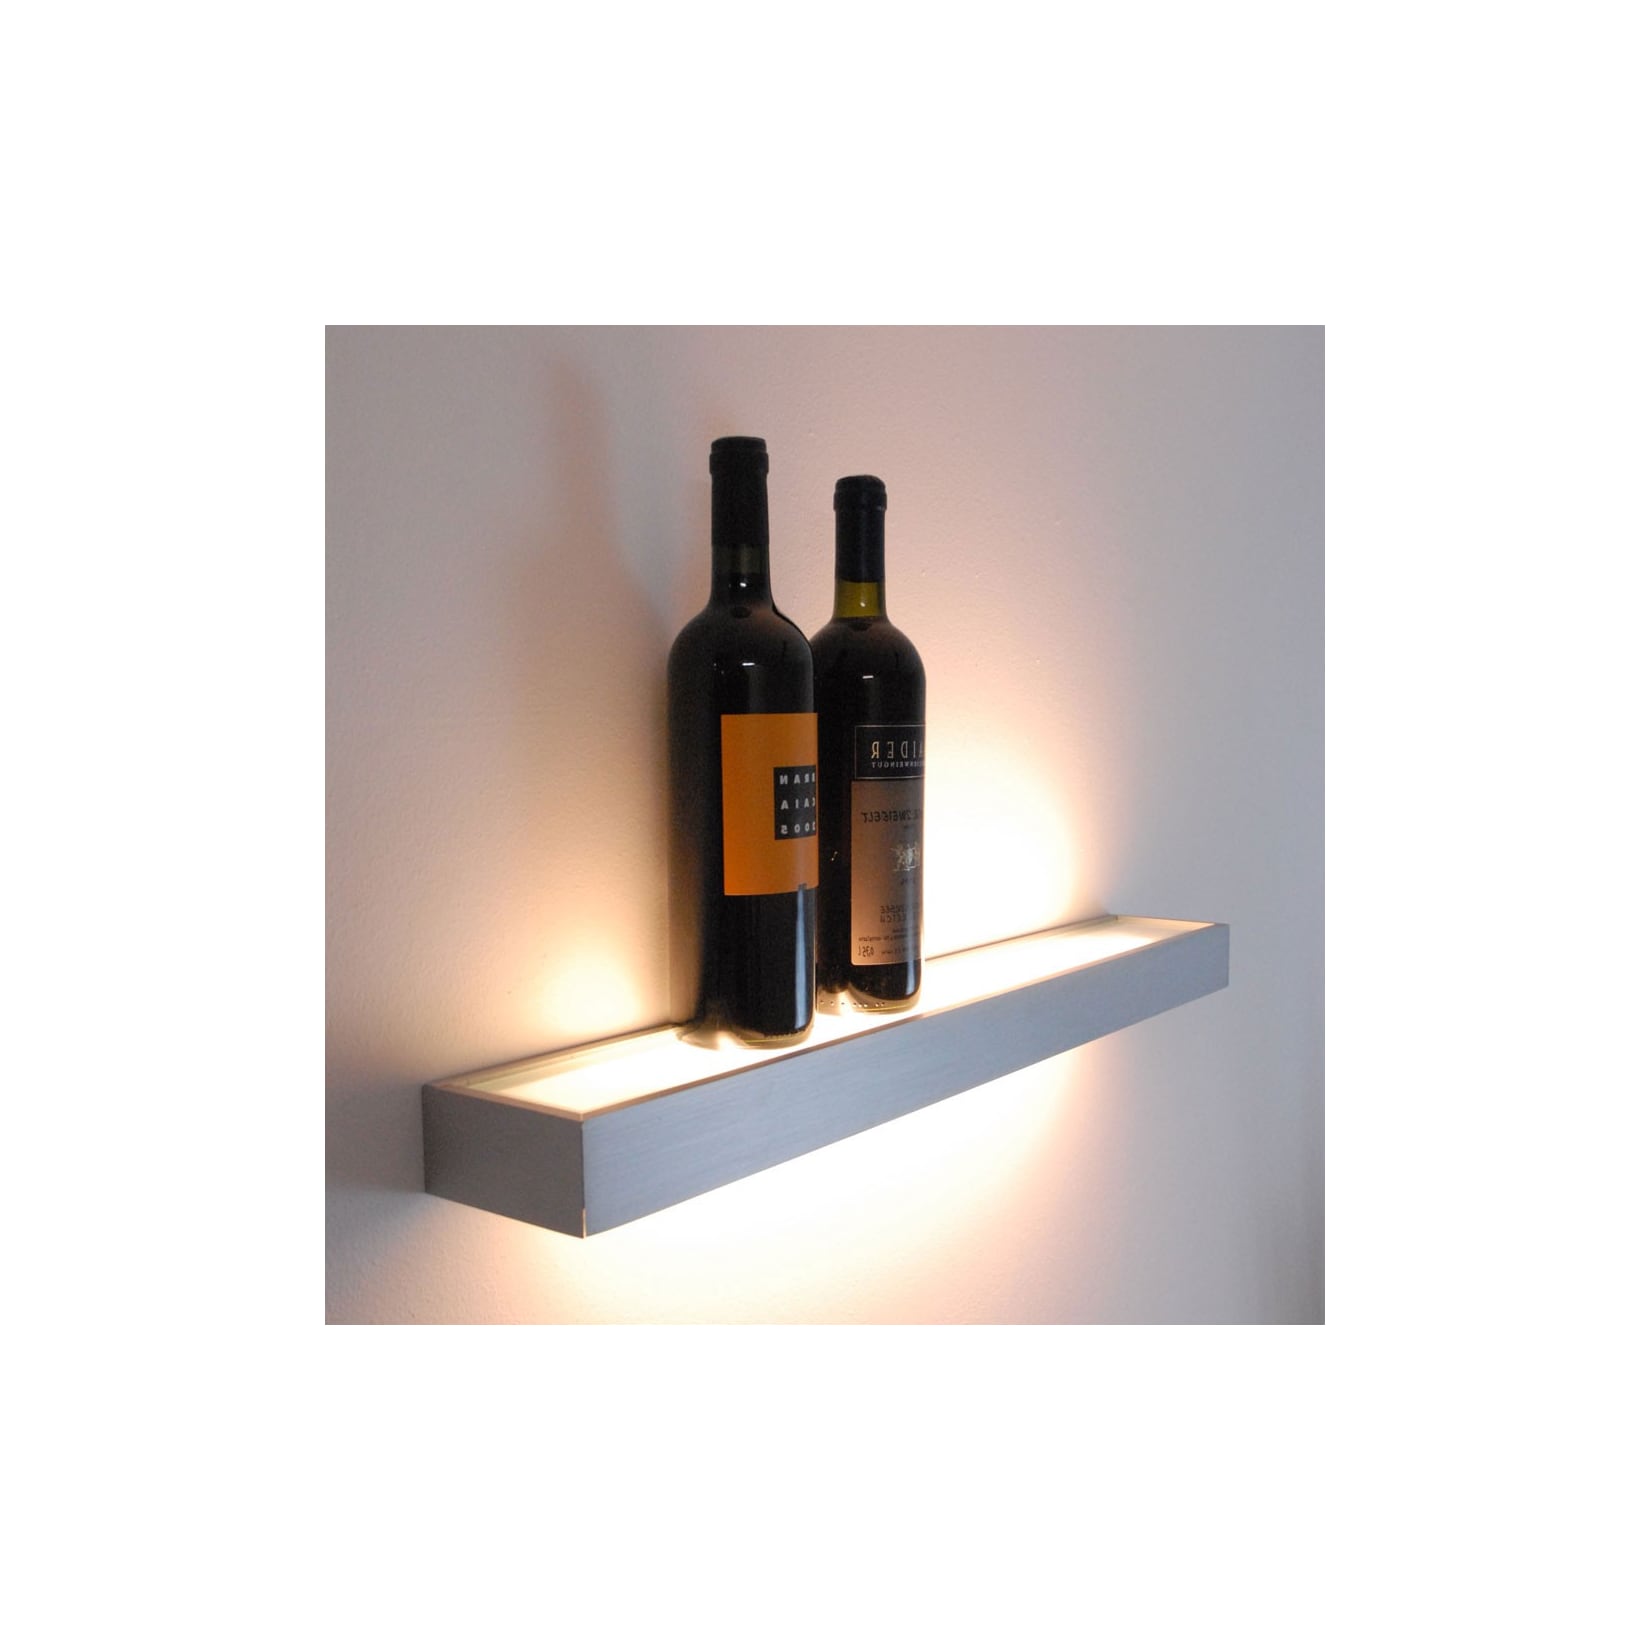 S.LUCE Cusa LED-Lichtboard Wandleuchte Up & Down